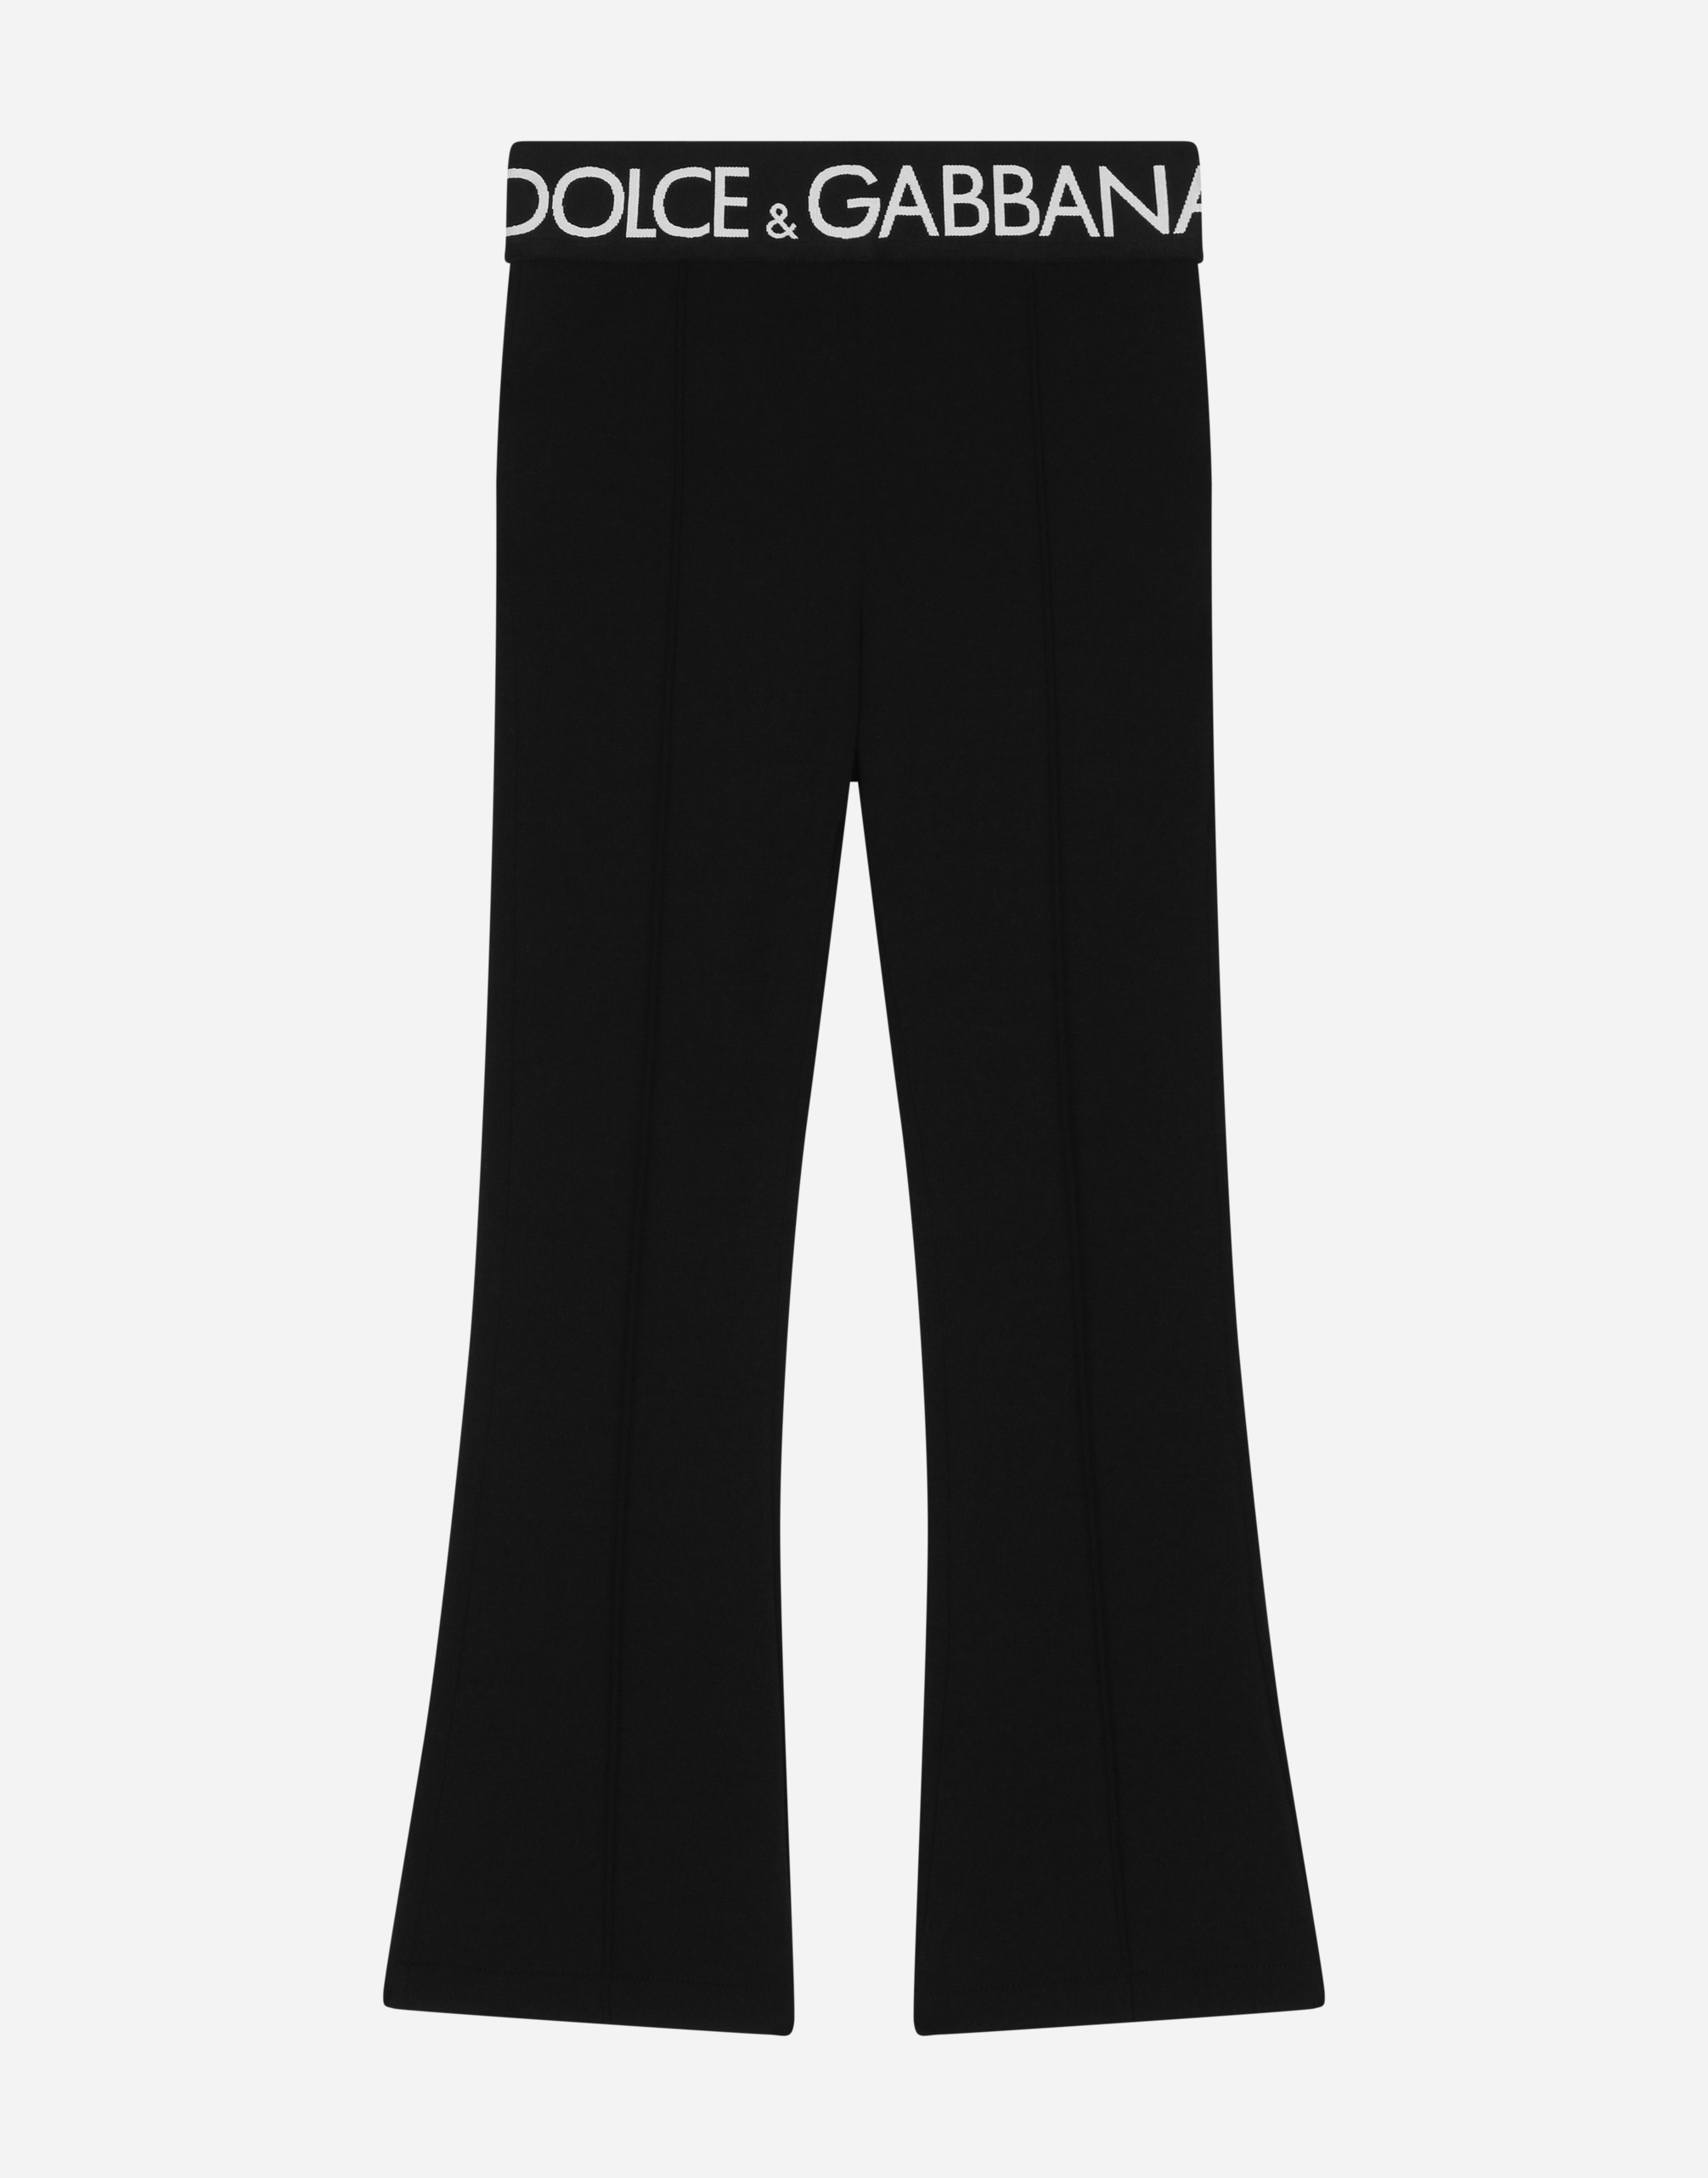 Jersey pants with branded elastic